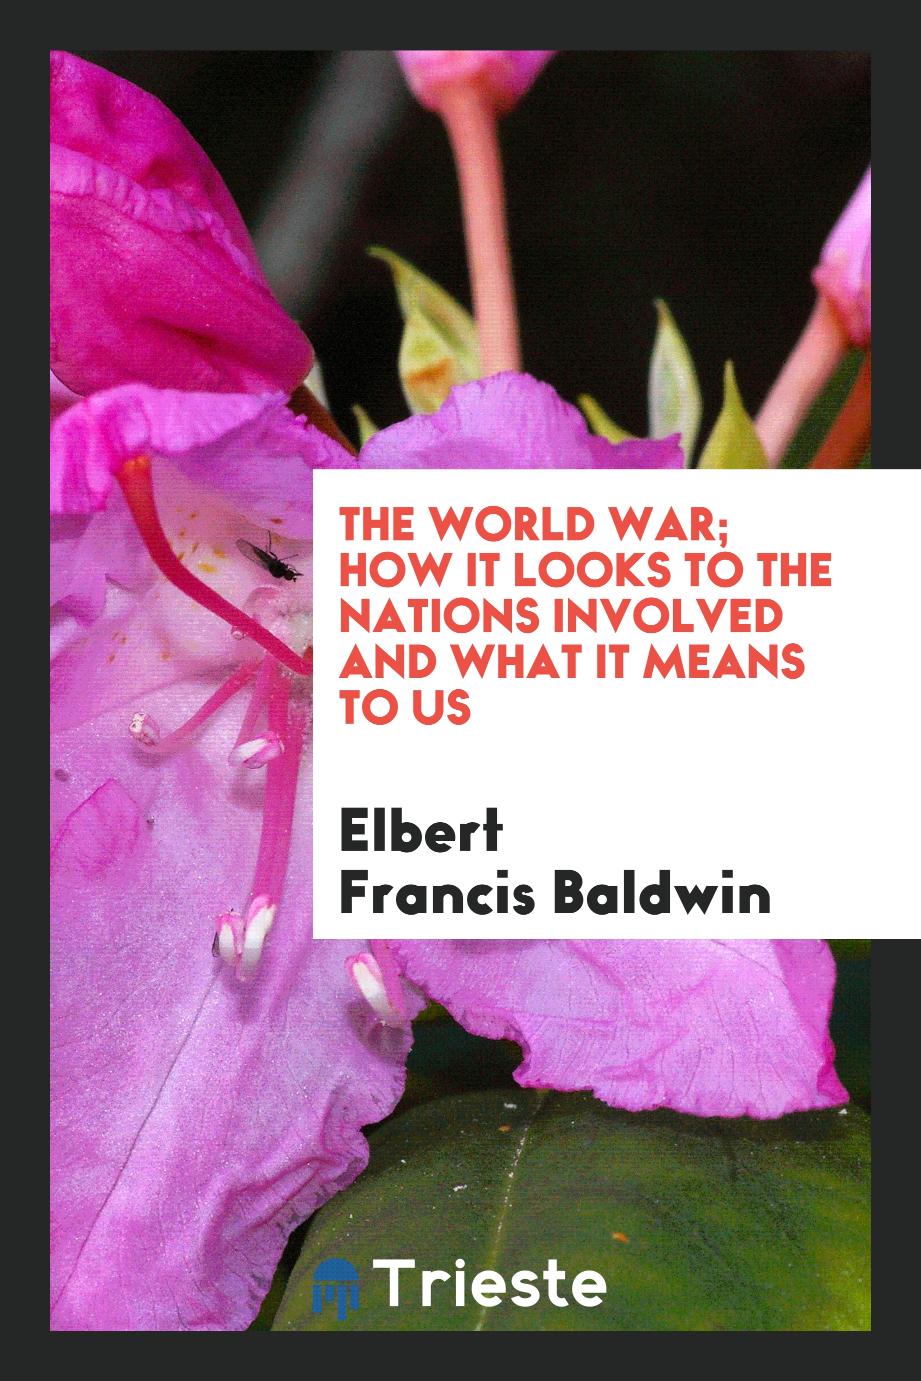 Elbert Francis Baldwin - The world war; how it looks to the nations involved and what it means to US